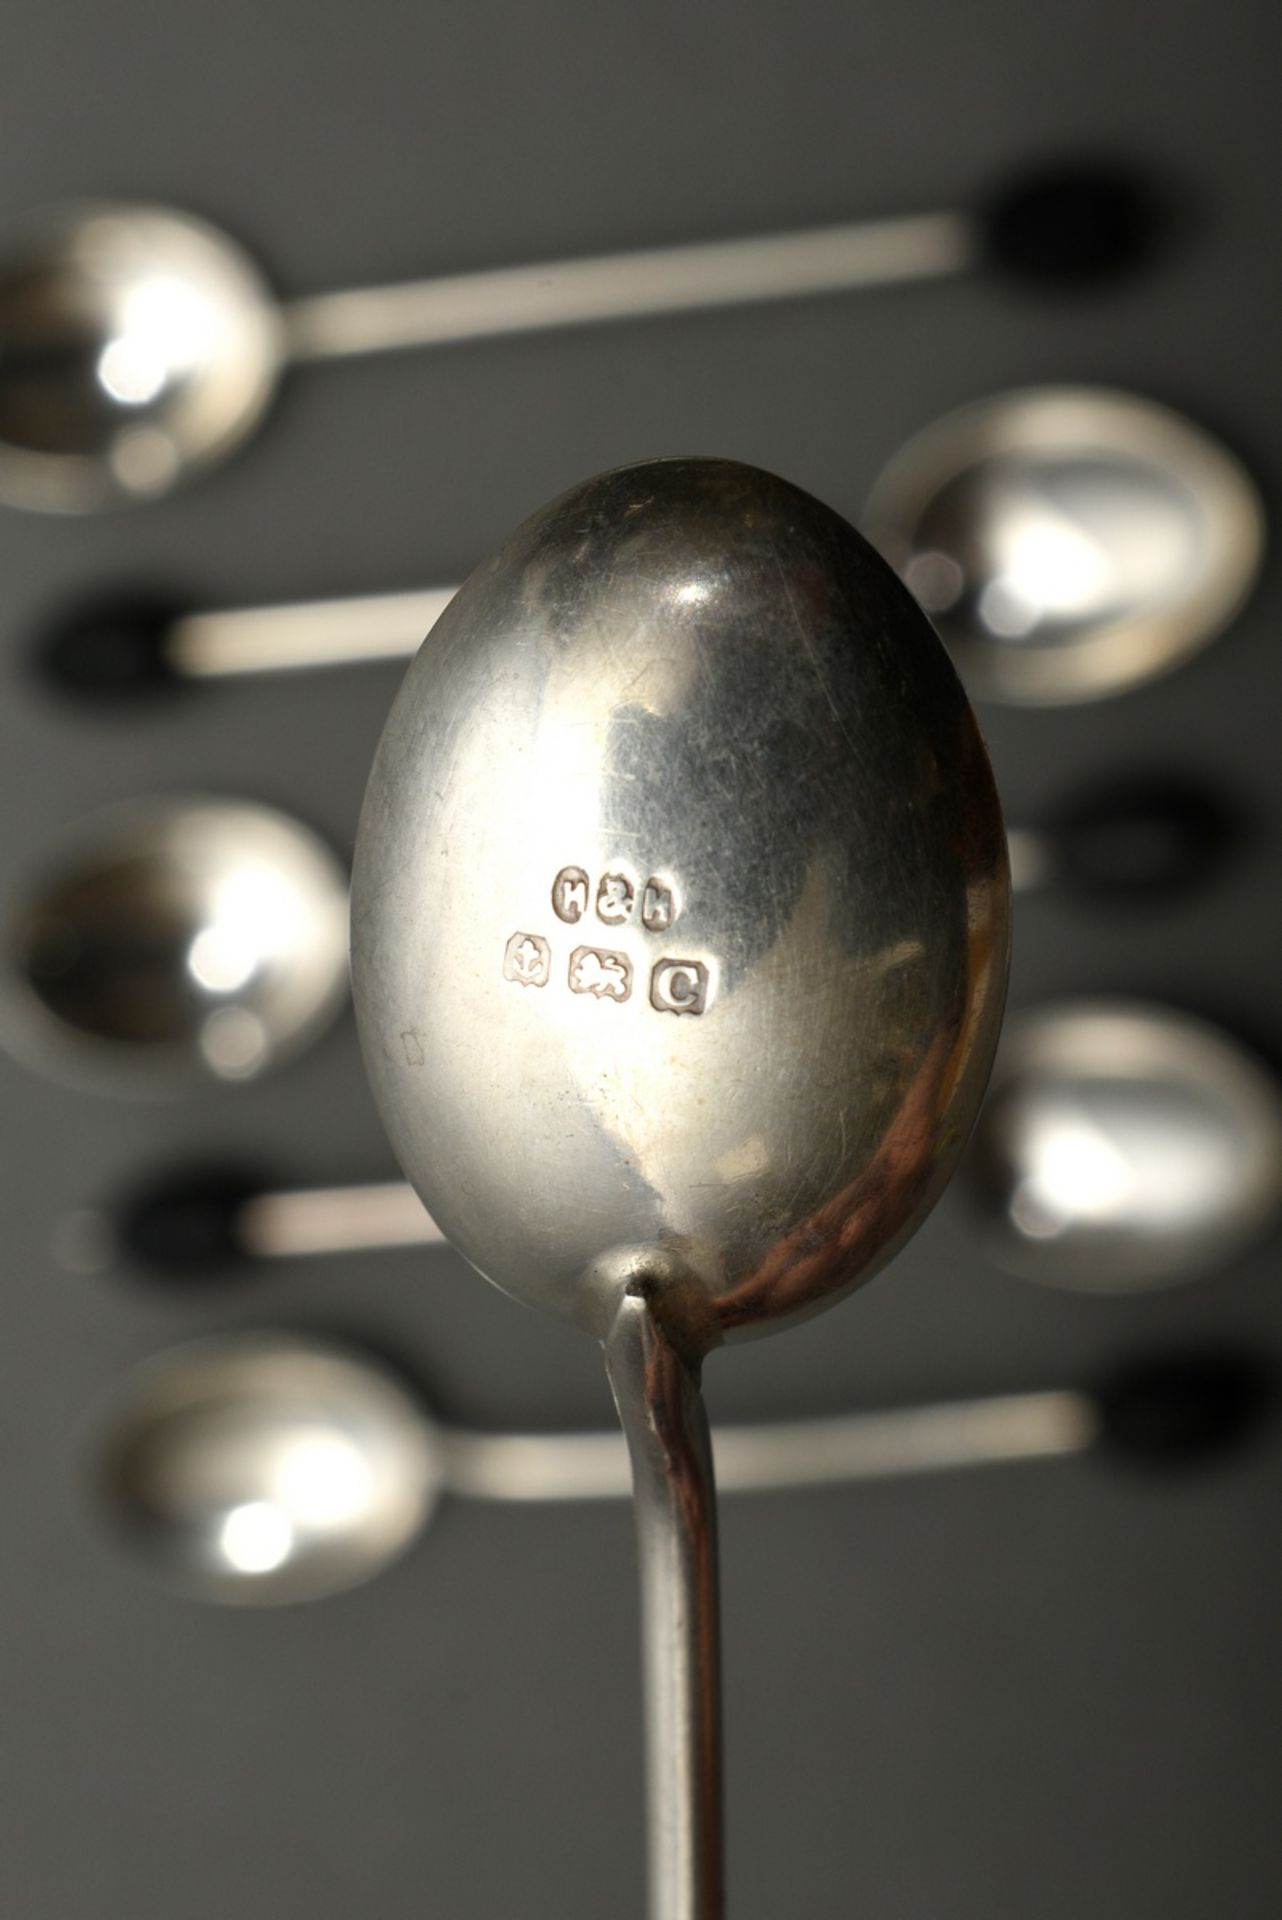 6 Midcentury demitasse spoons with sculpted wooden coffee beans on the handle, MM: Hukin & Heath, B - Image 3 of 3